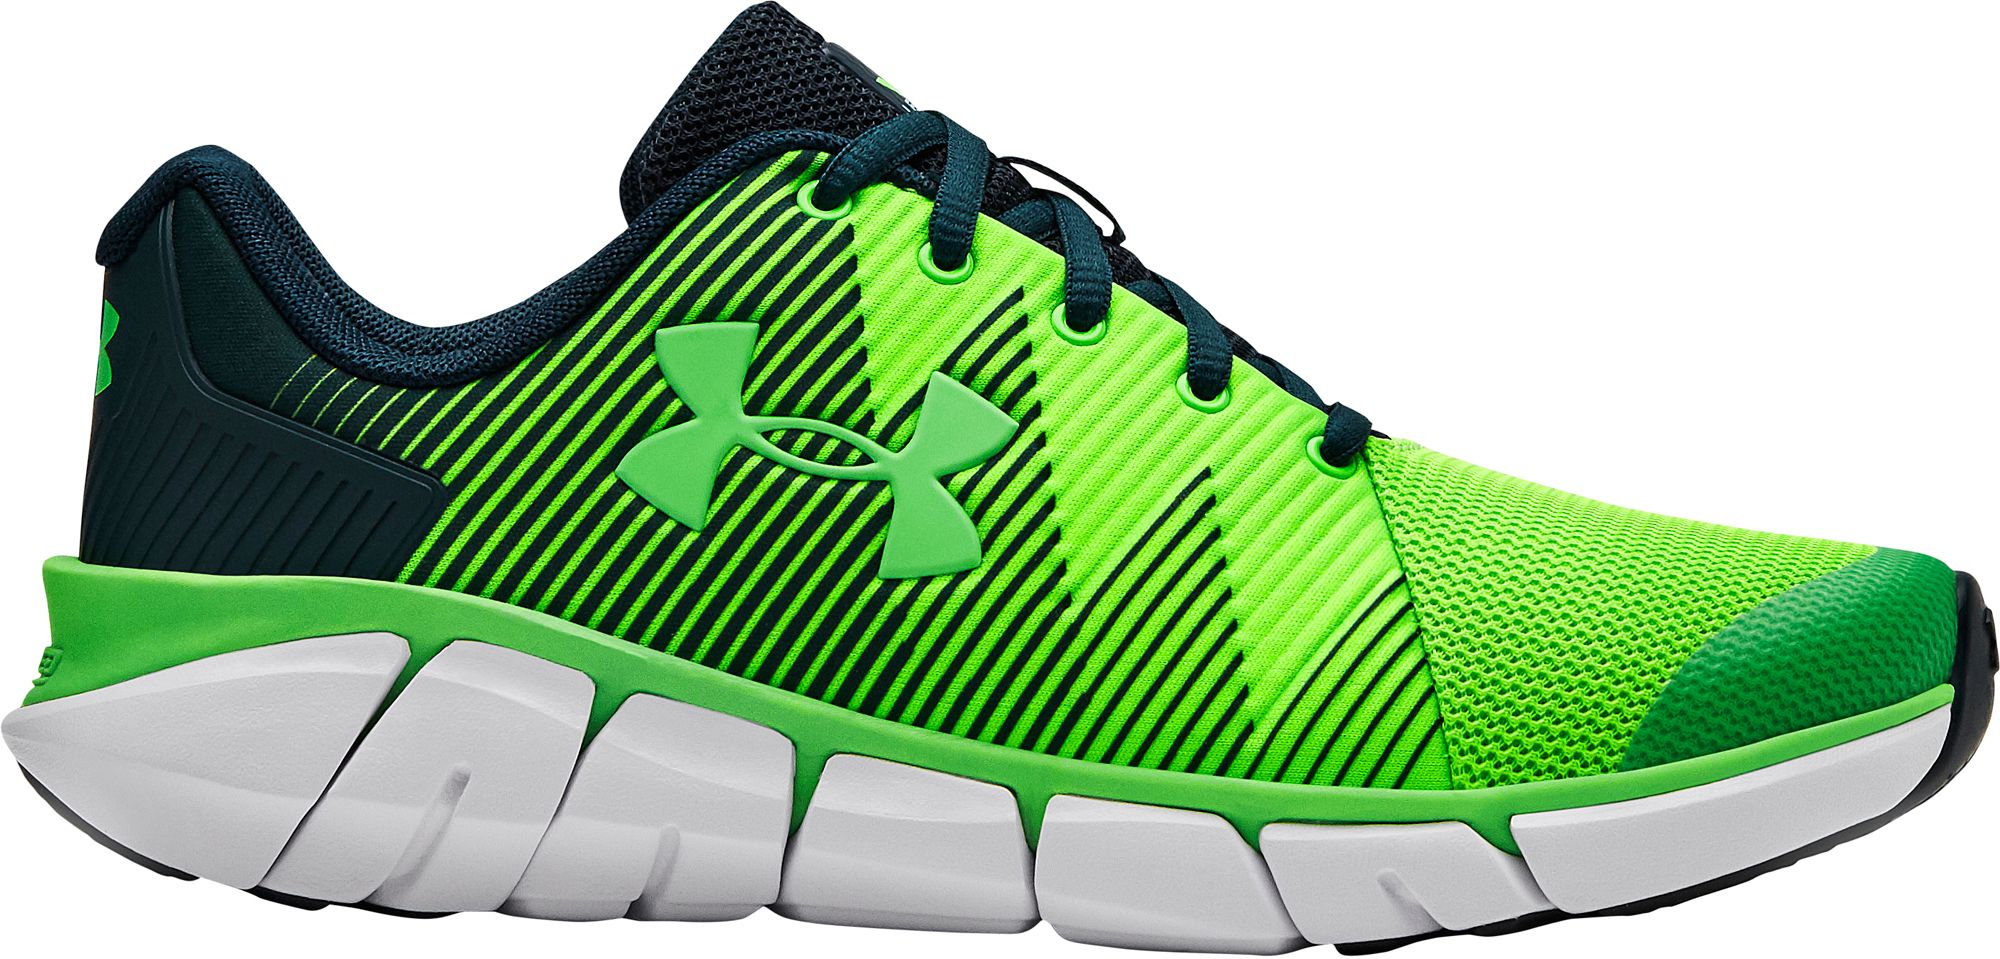 green under armor shoes